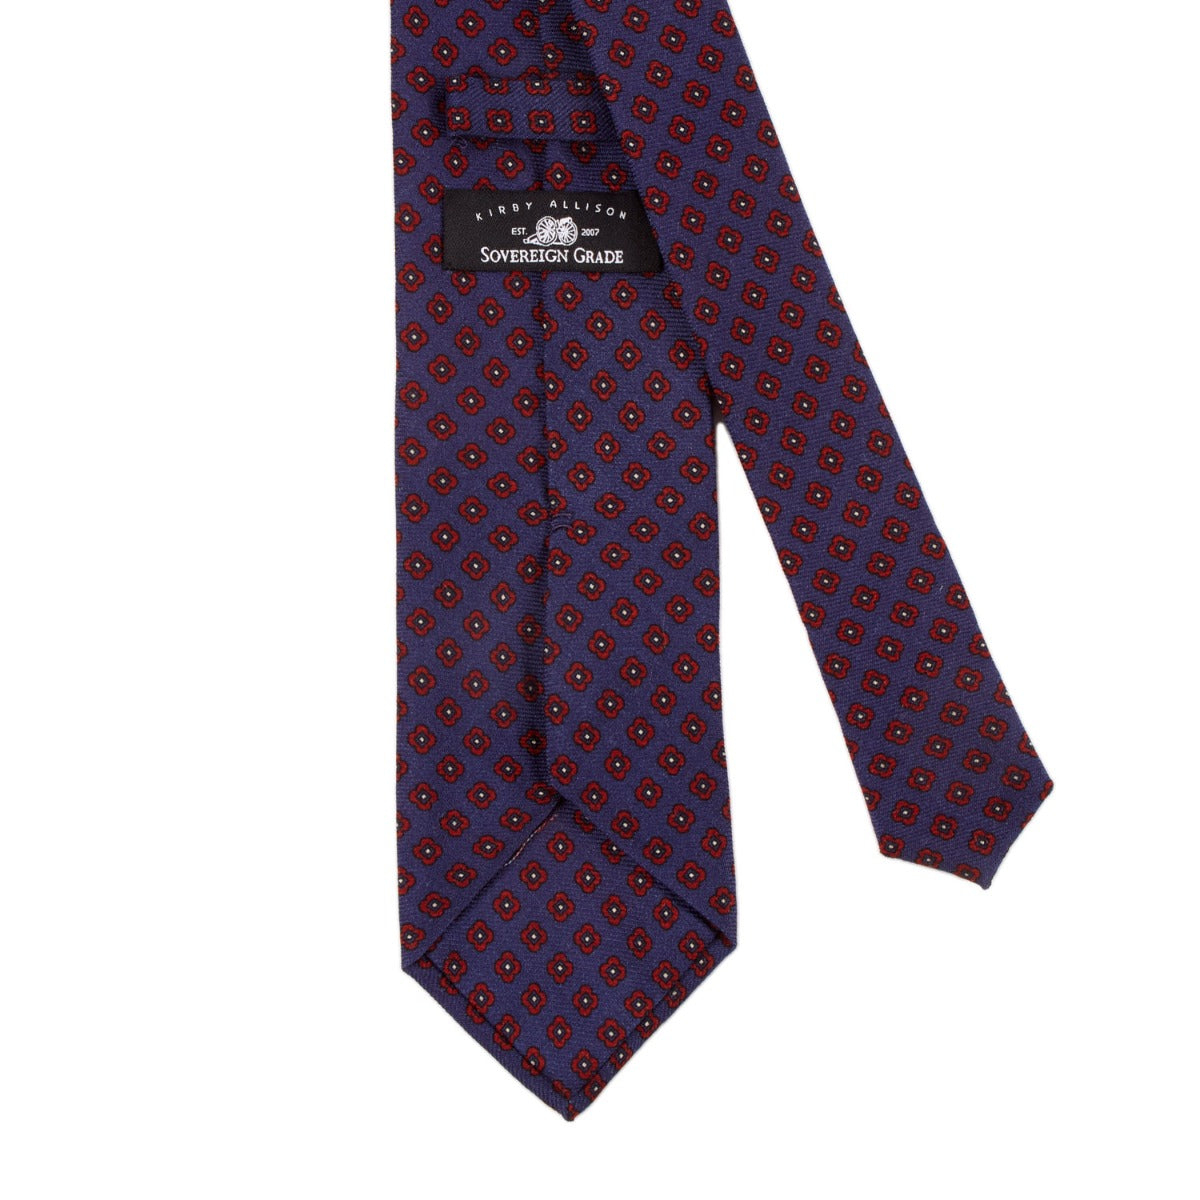 A handmade Sovereign Grade Butcher Blue Small Floral Wool Challis tie from KirbyAllison.com with a polka dot pattern.